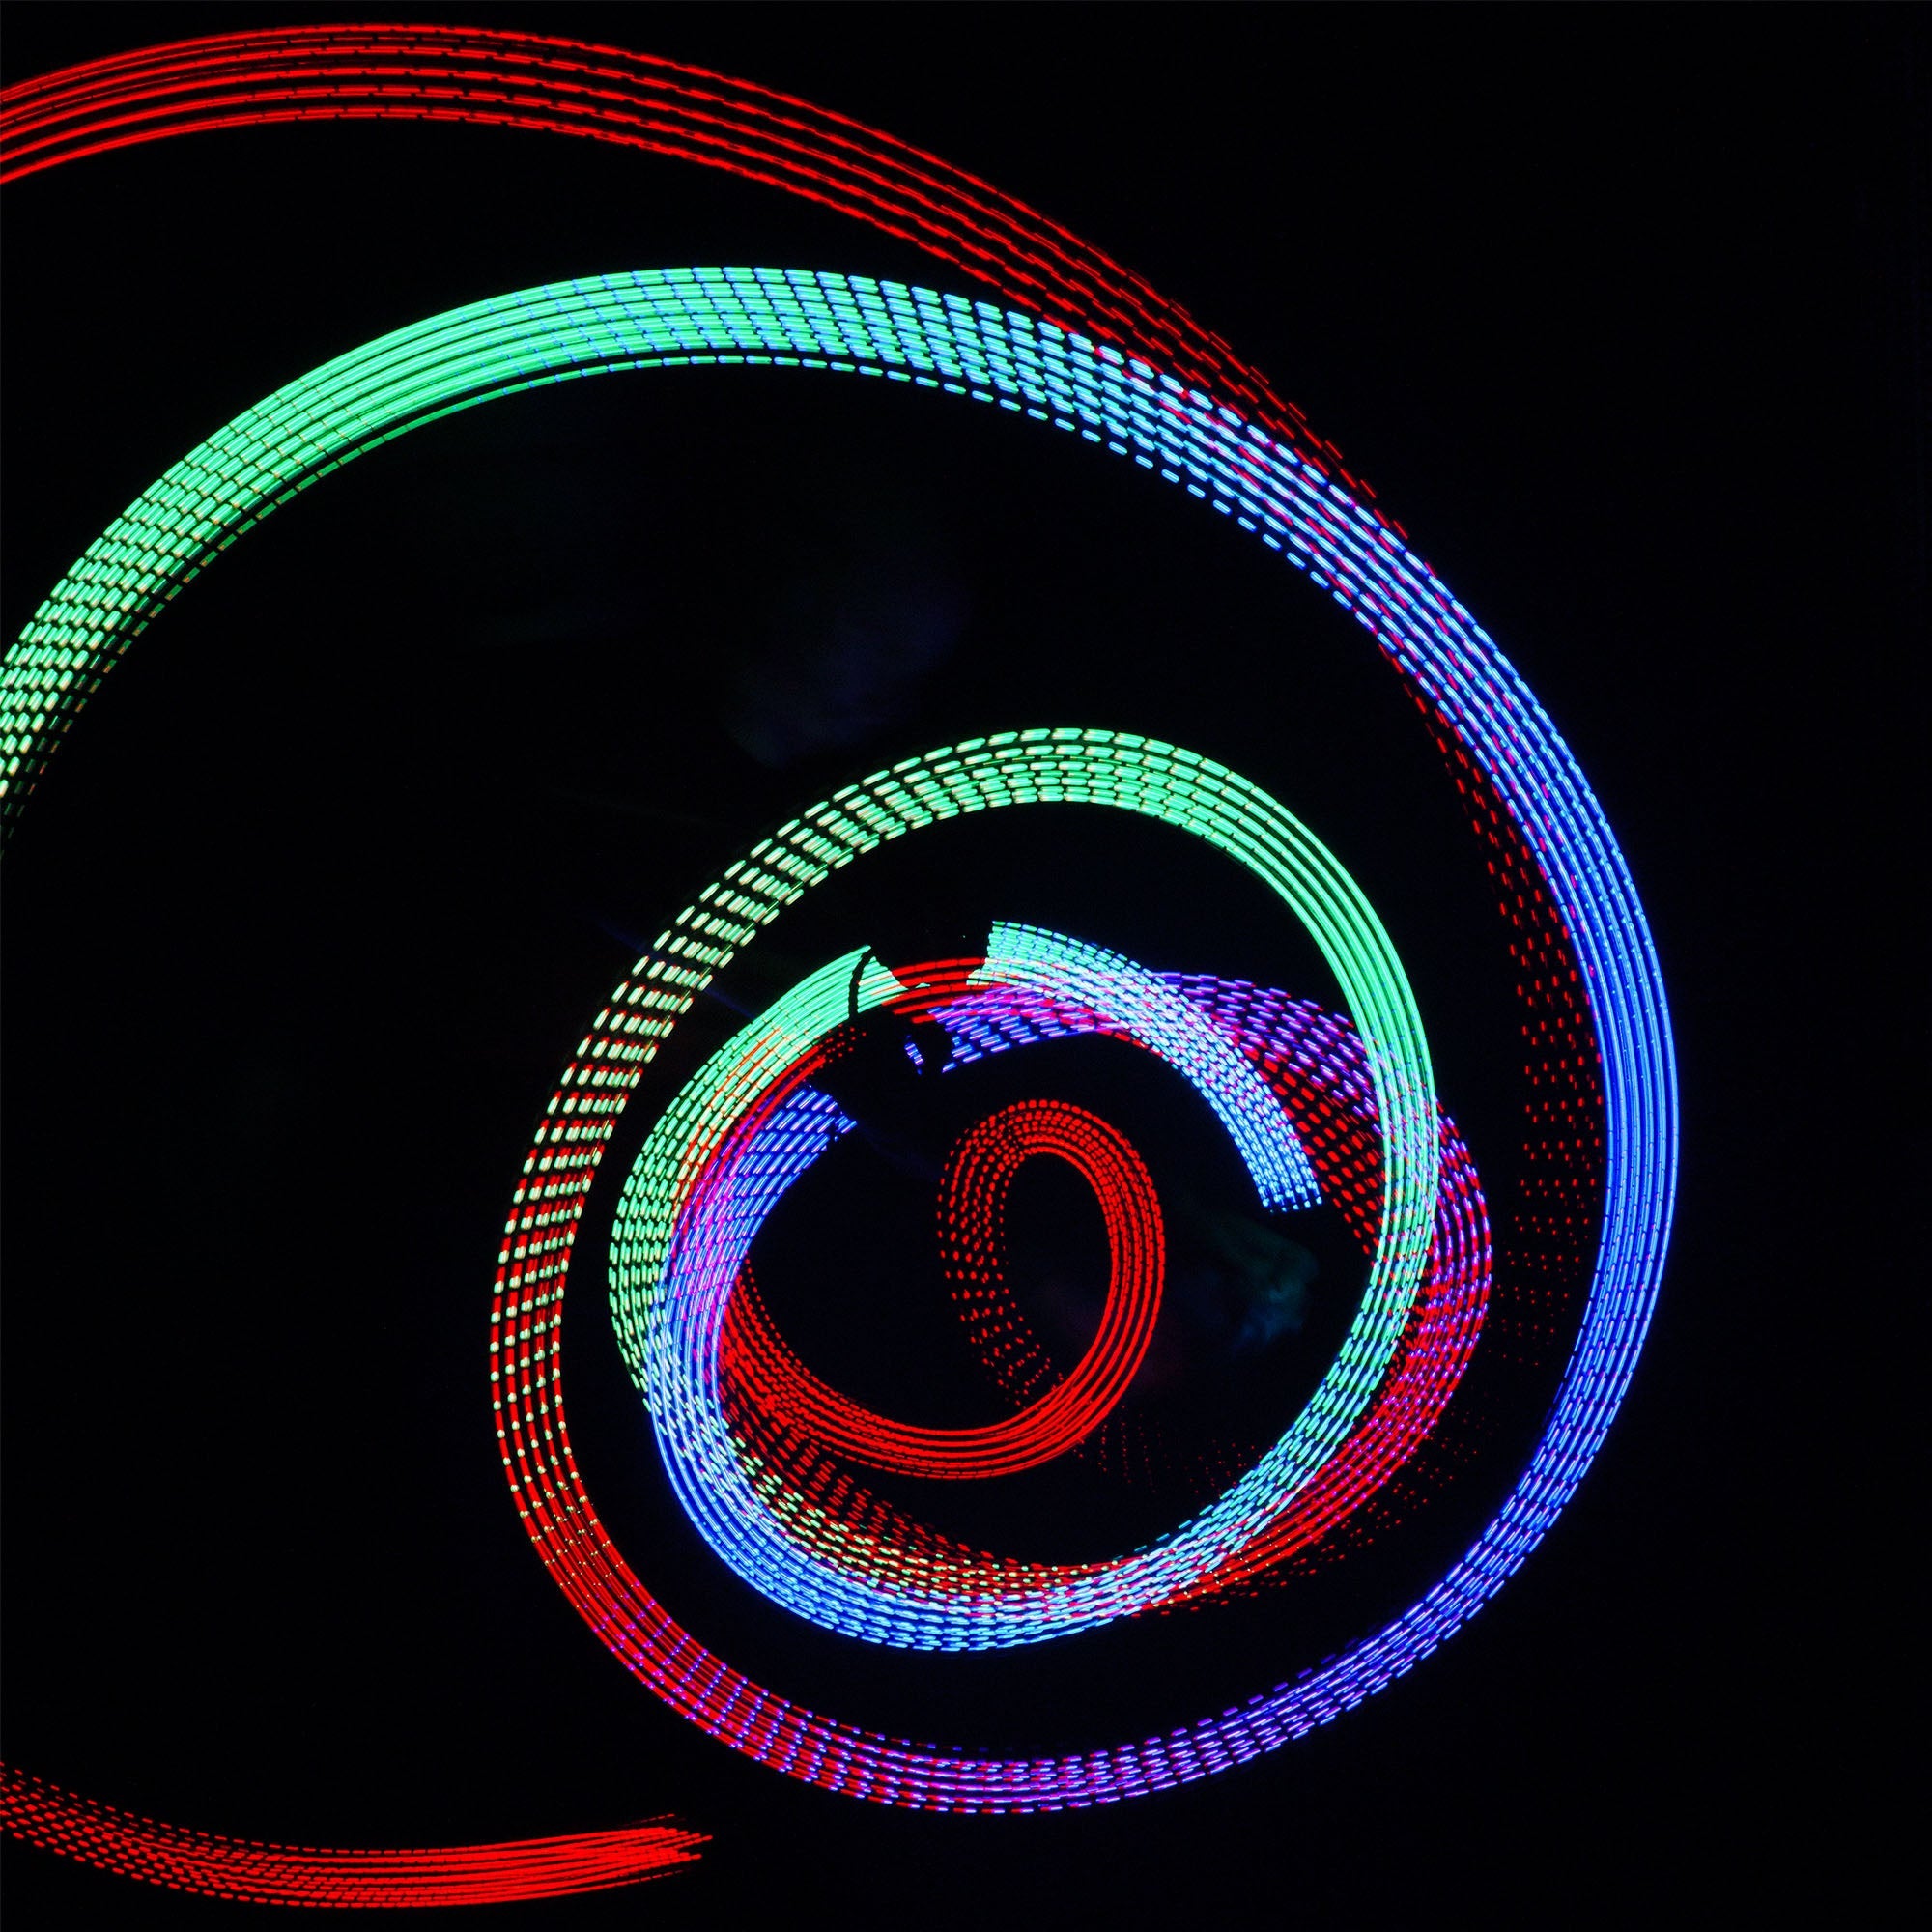 TriX 3.0 light trail with many colours.